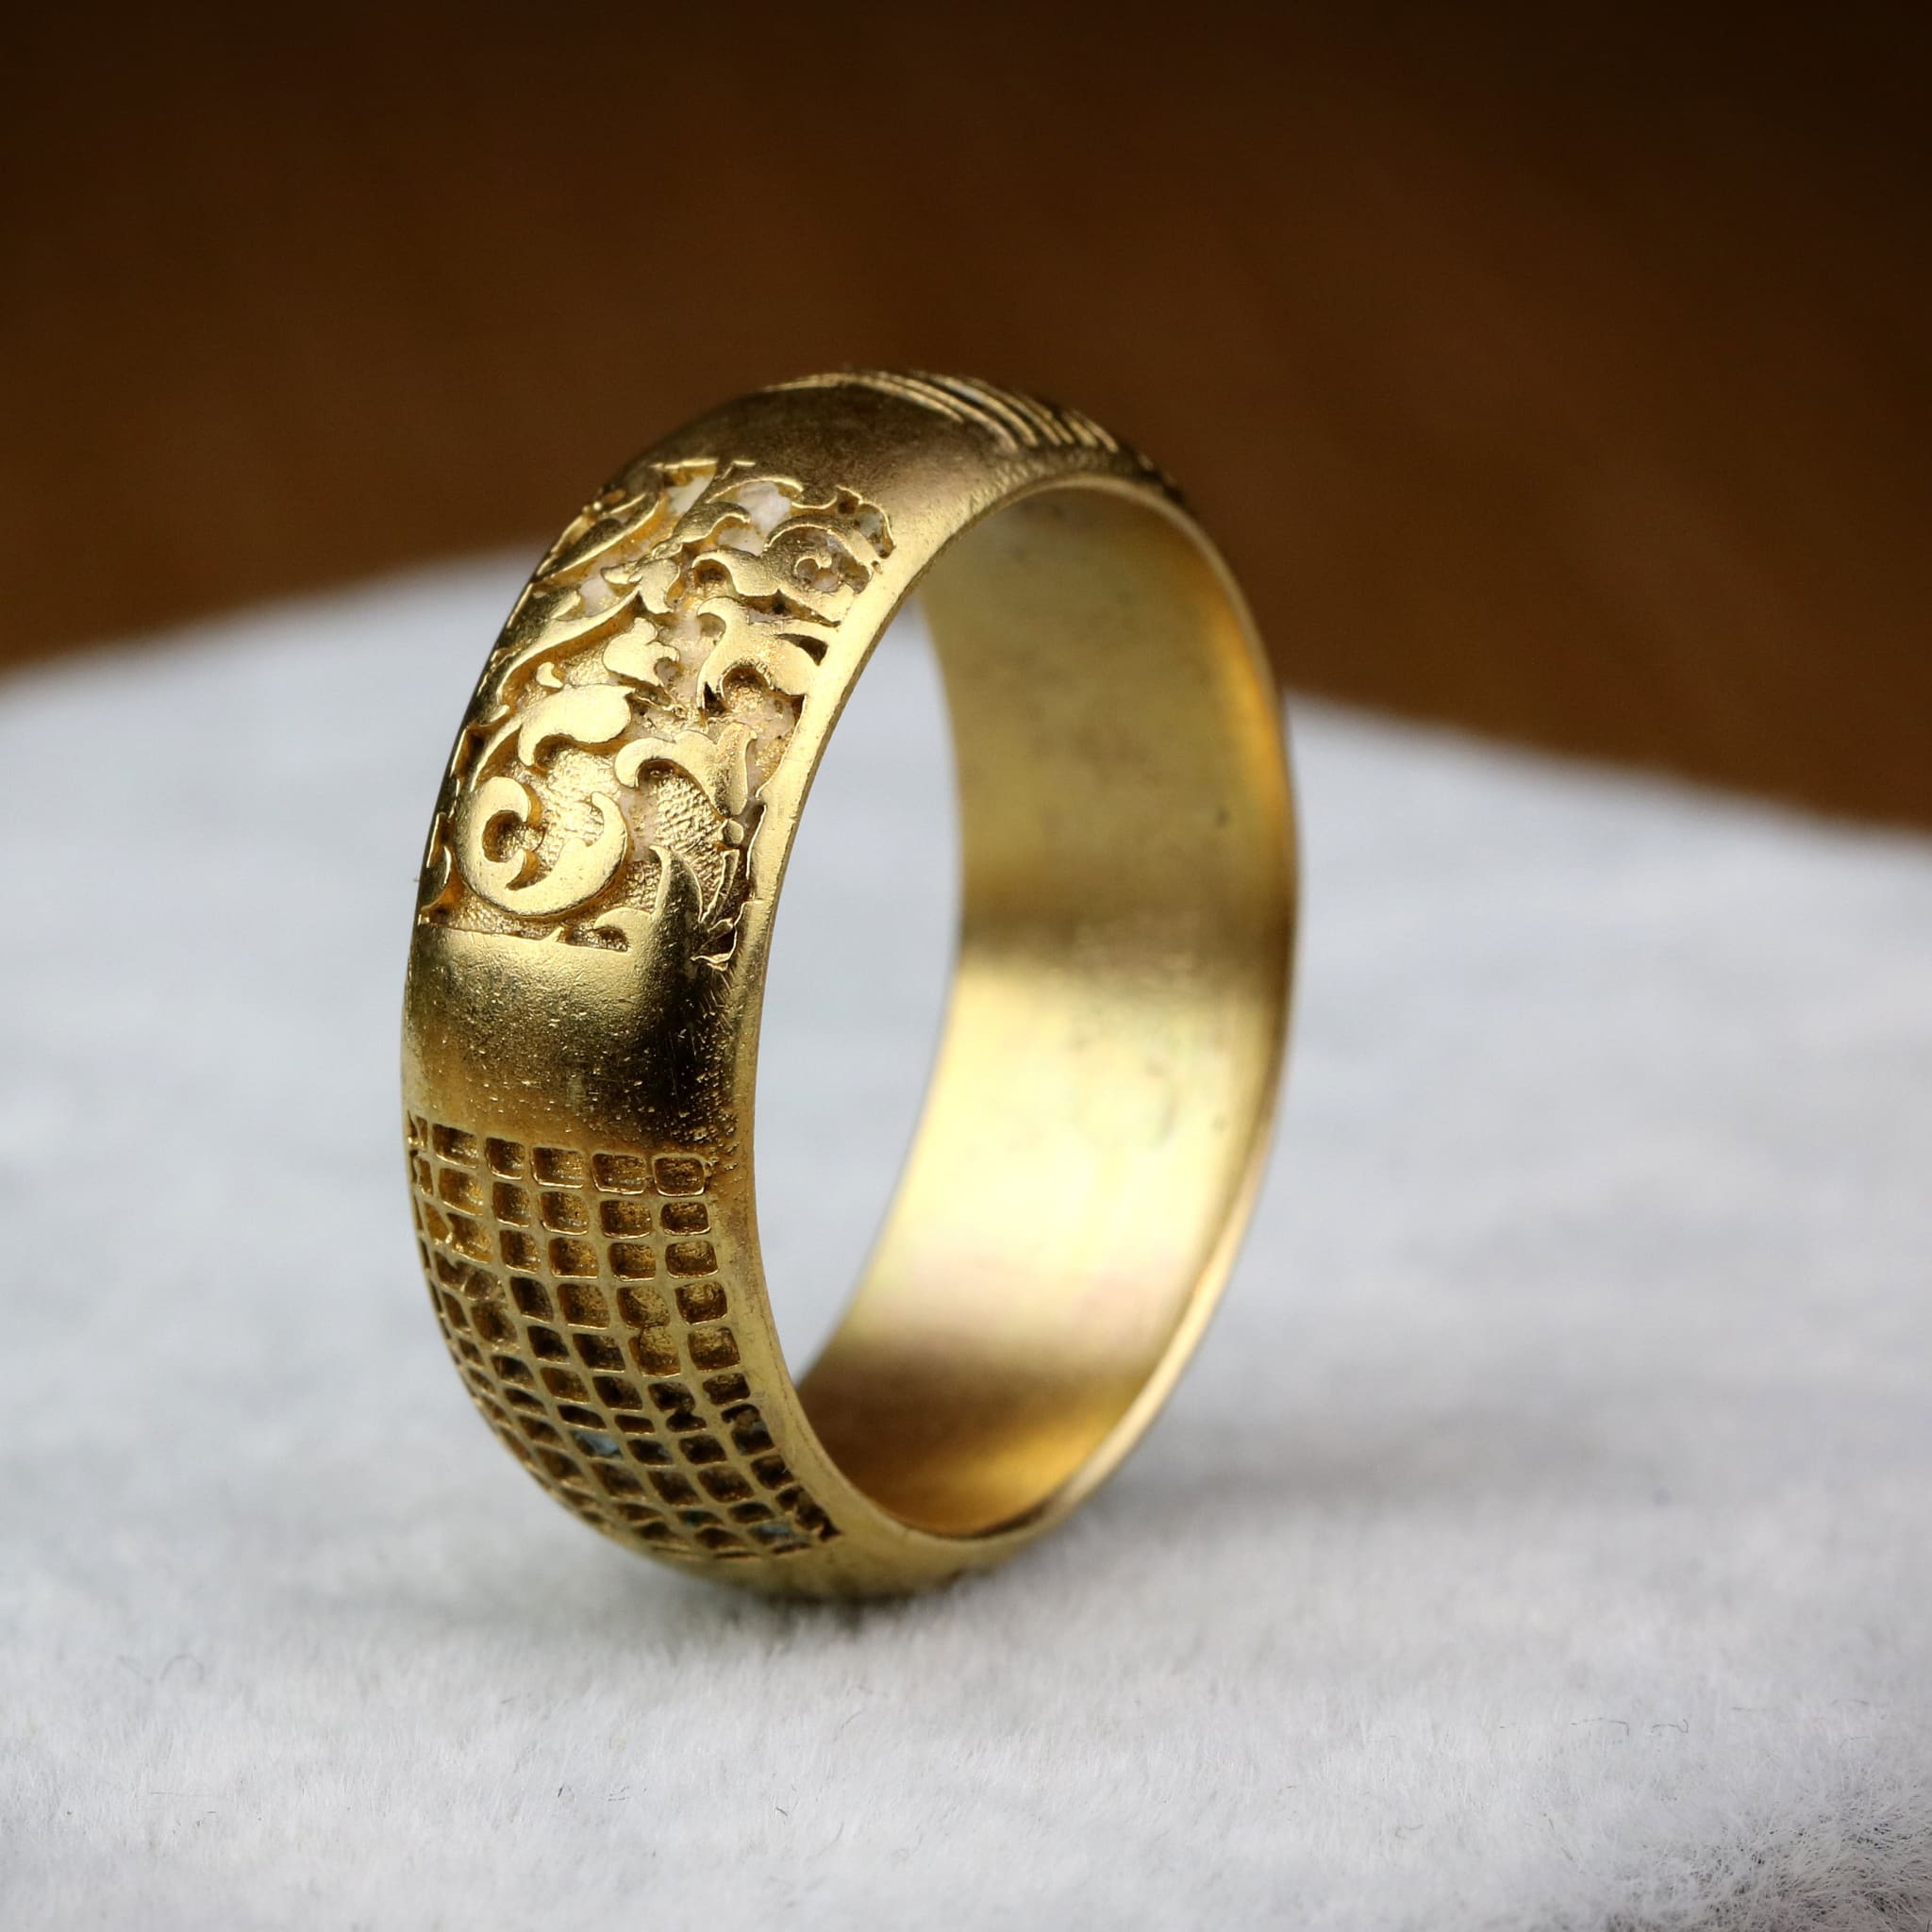 Pin by অবুঝ হৃদয় on Gold ring designs | Gold earrings models, Gold rings  jewelry, Gold ring designs